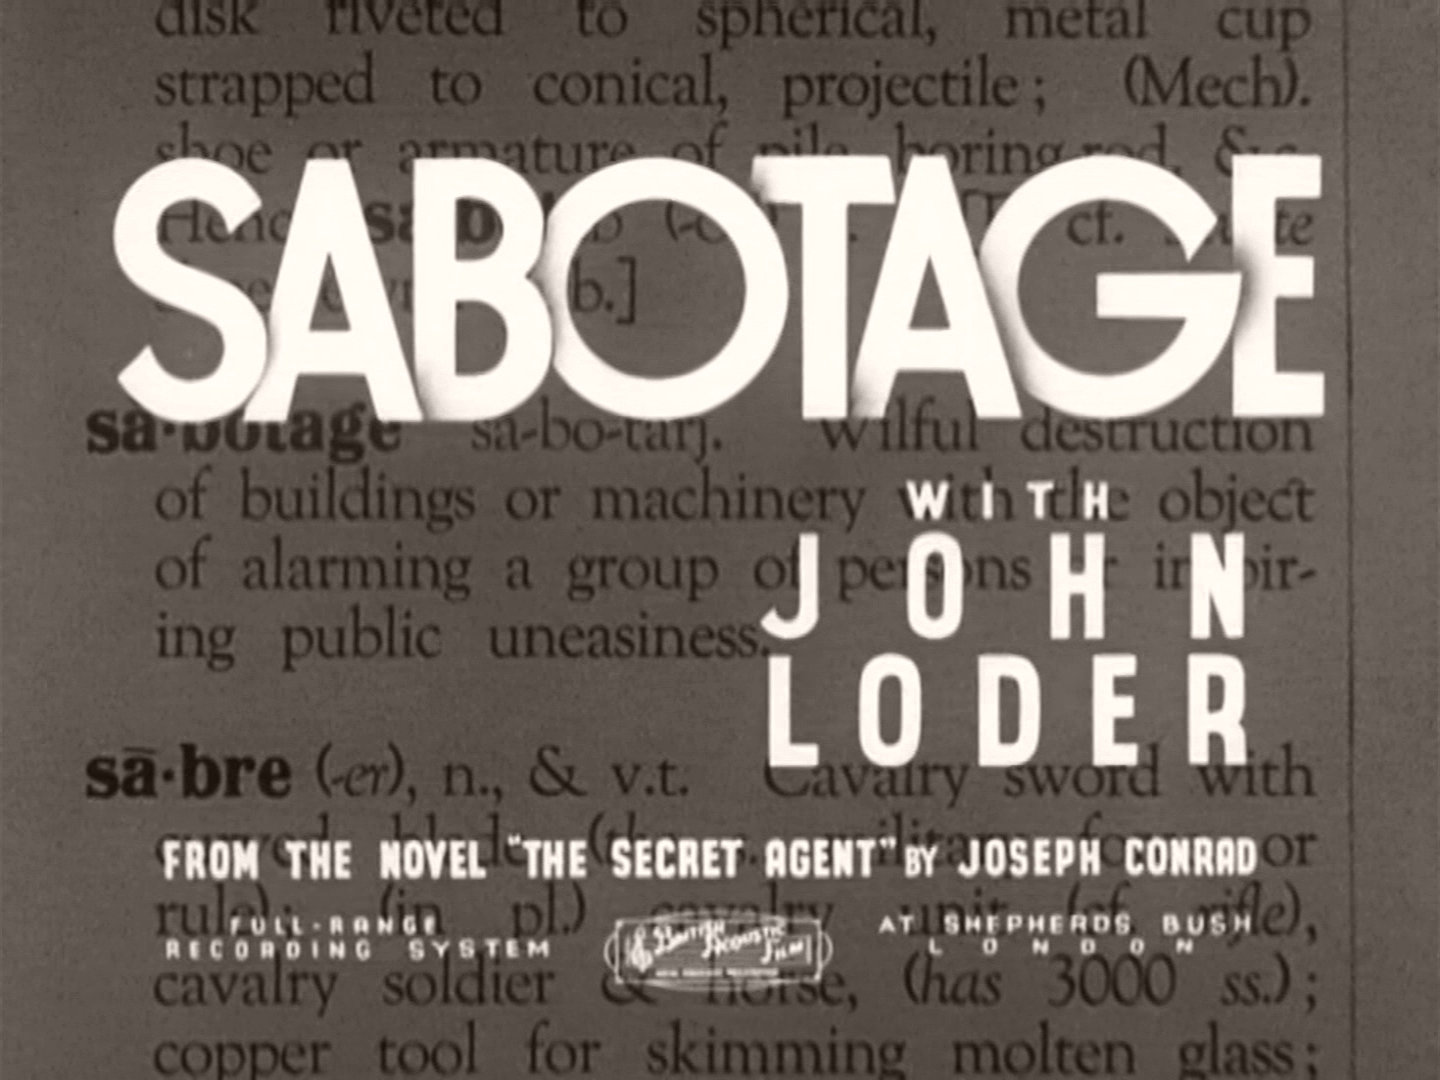 Main title from Sabotage (1936) (3). With John Loder